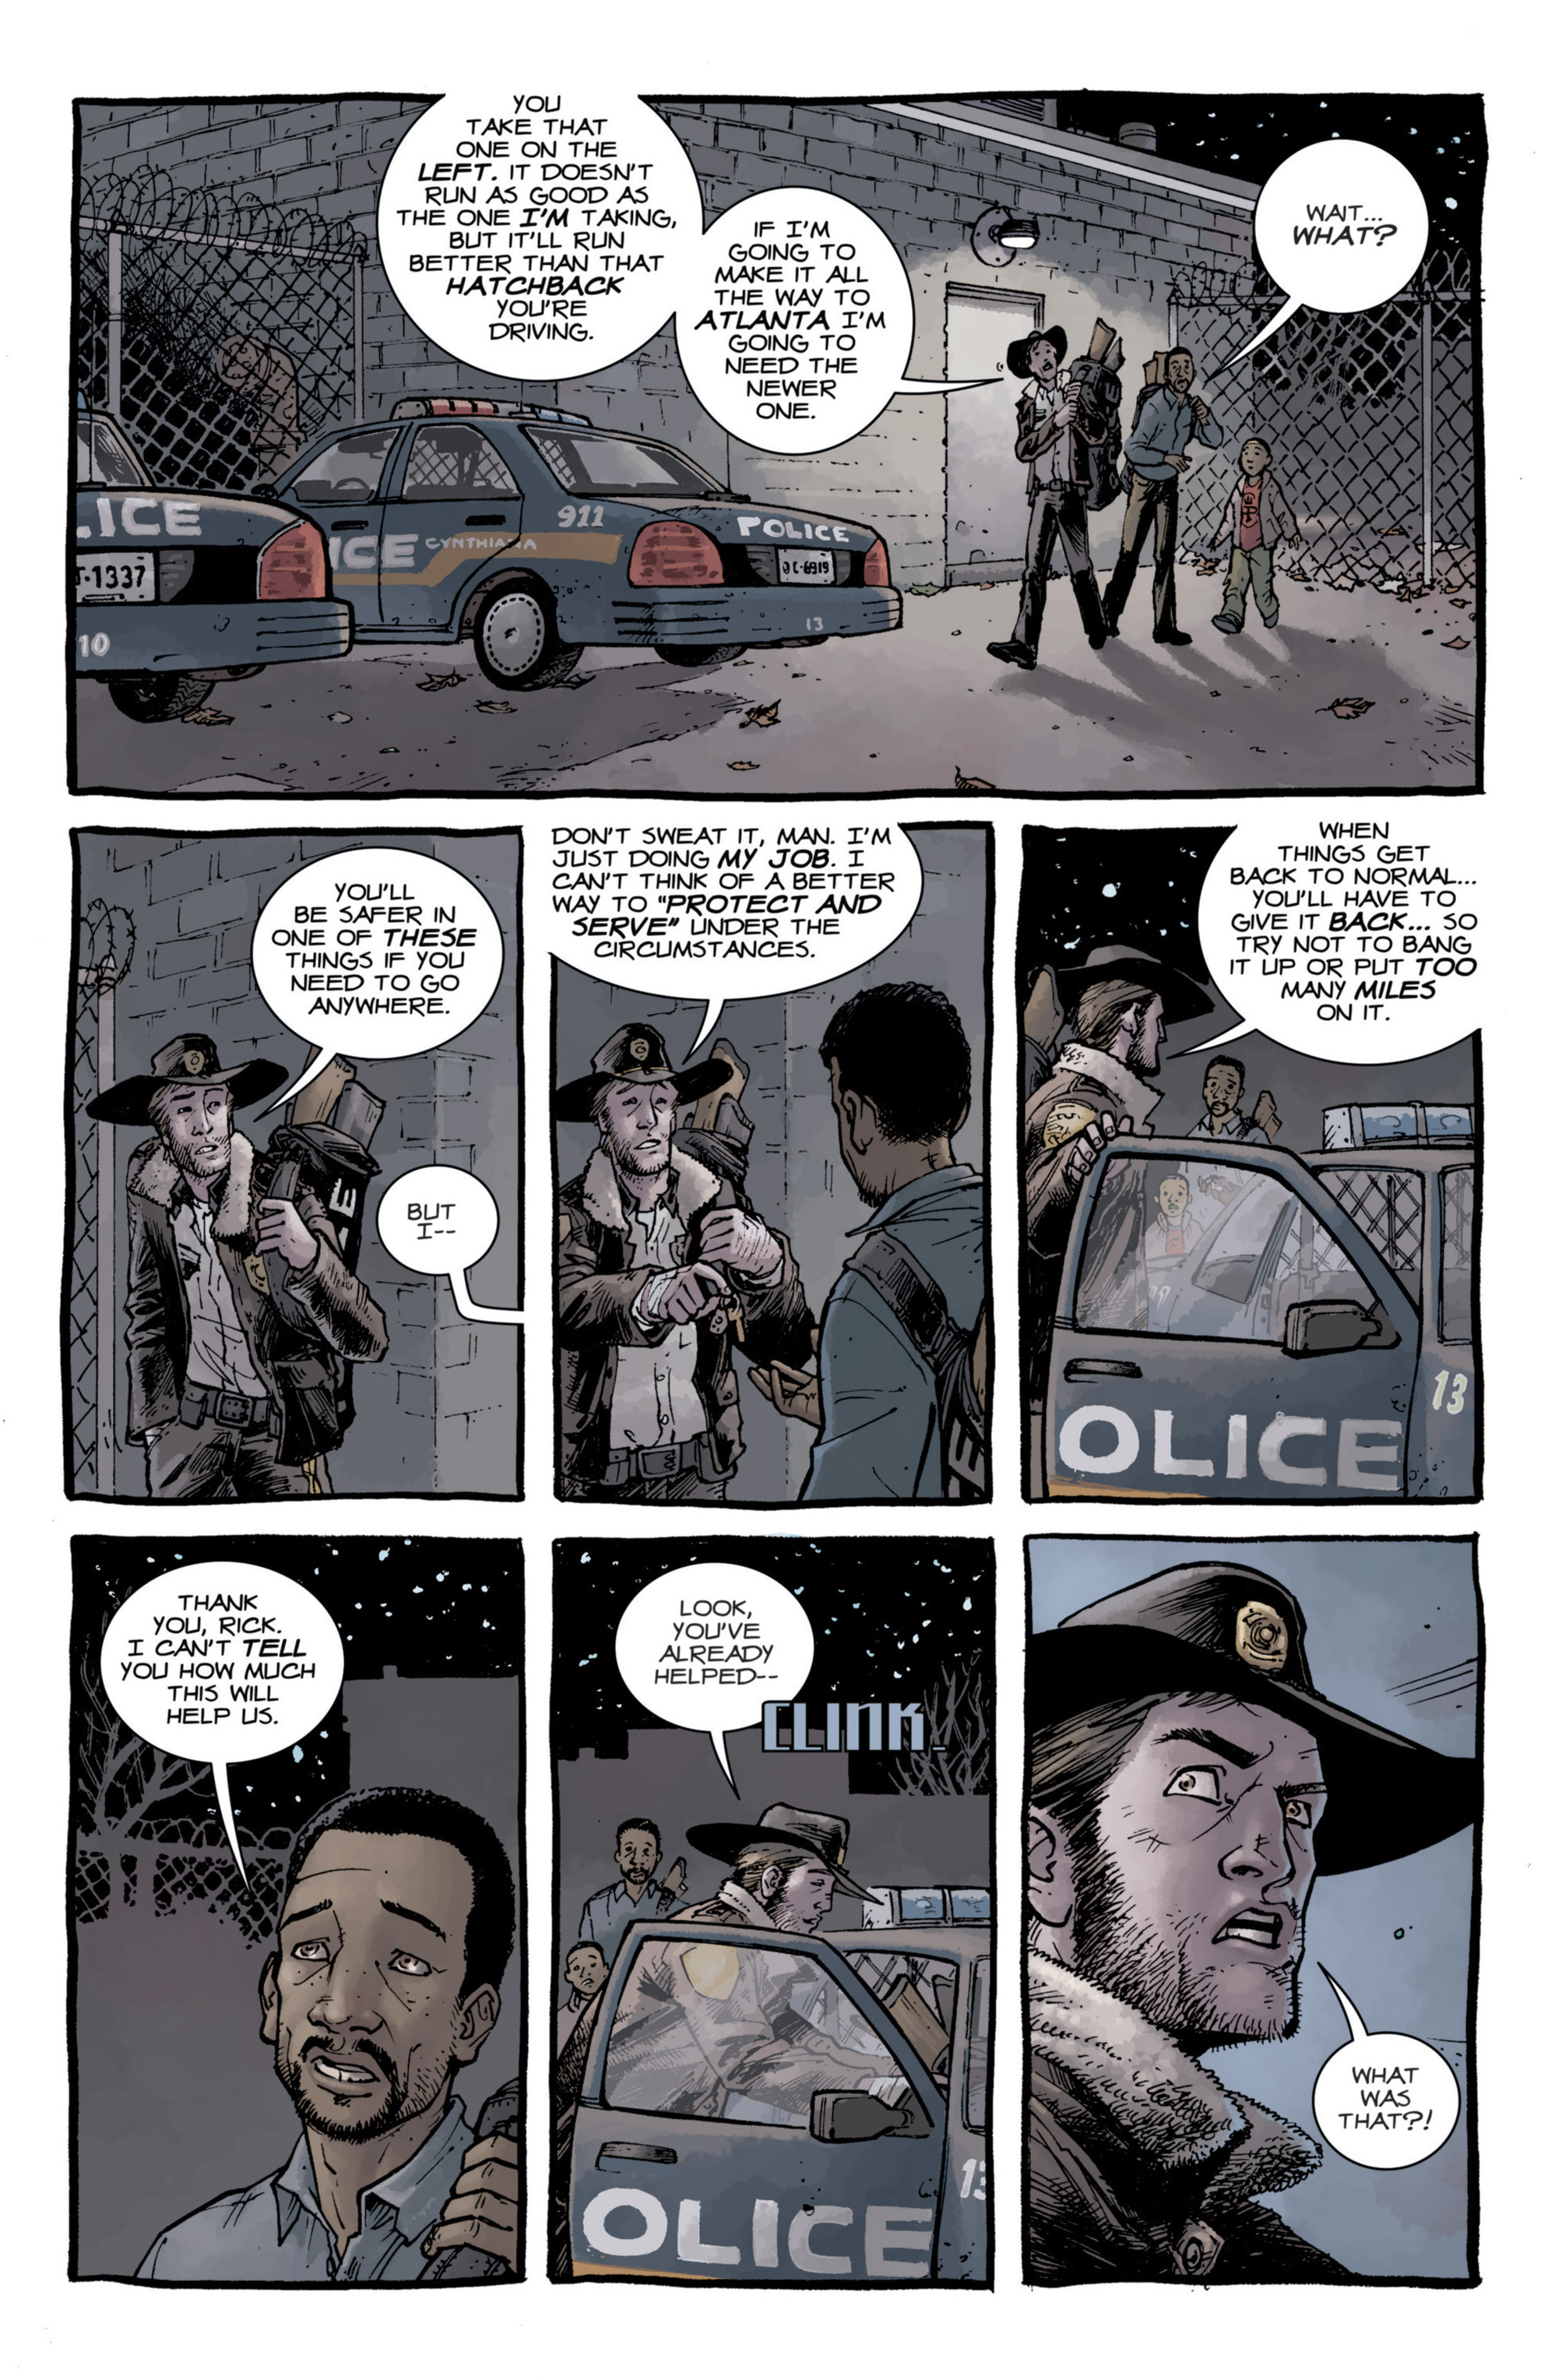 Read online The Walking Dead comic -  Issue # _Special - 1 - 10th Anniversary Edition - 22